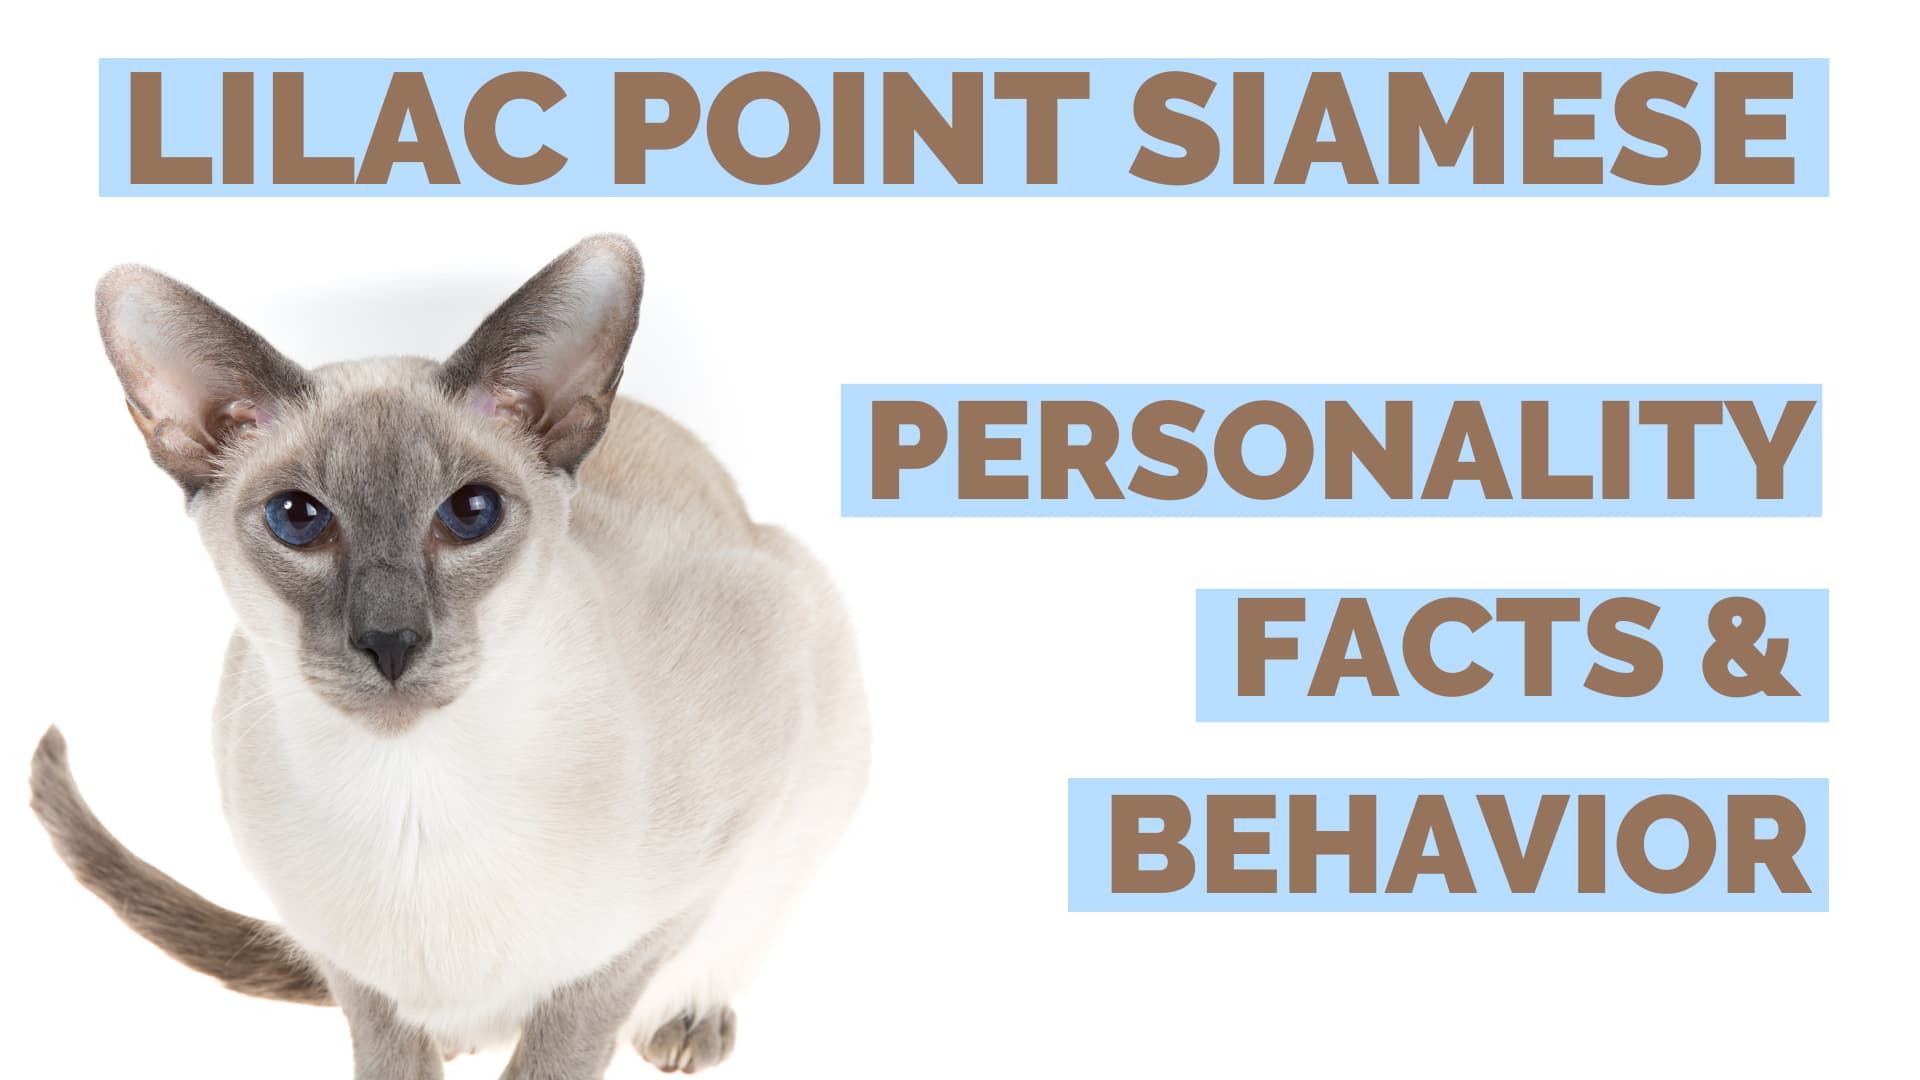 lilac point siamese personality